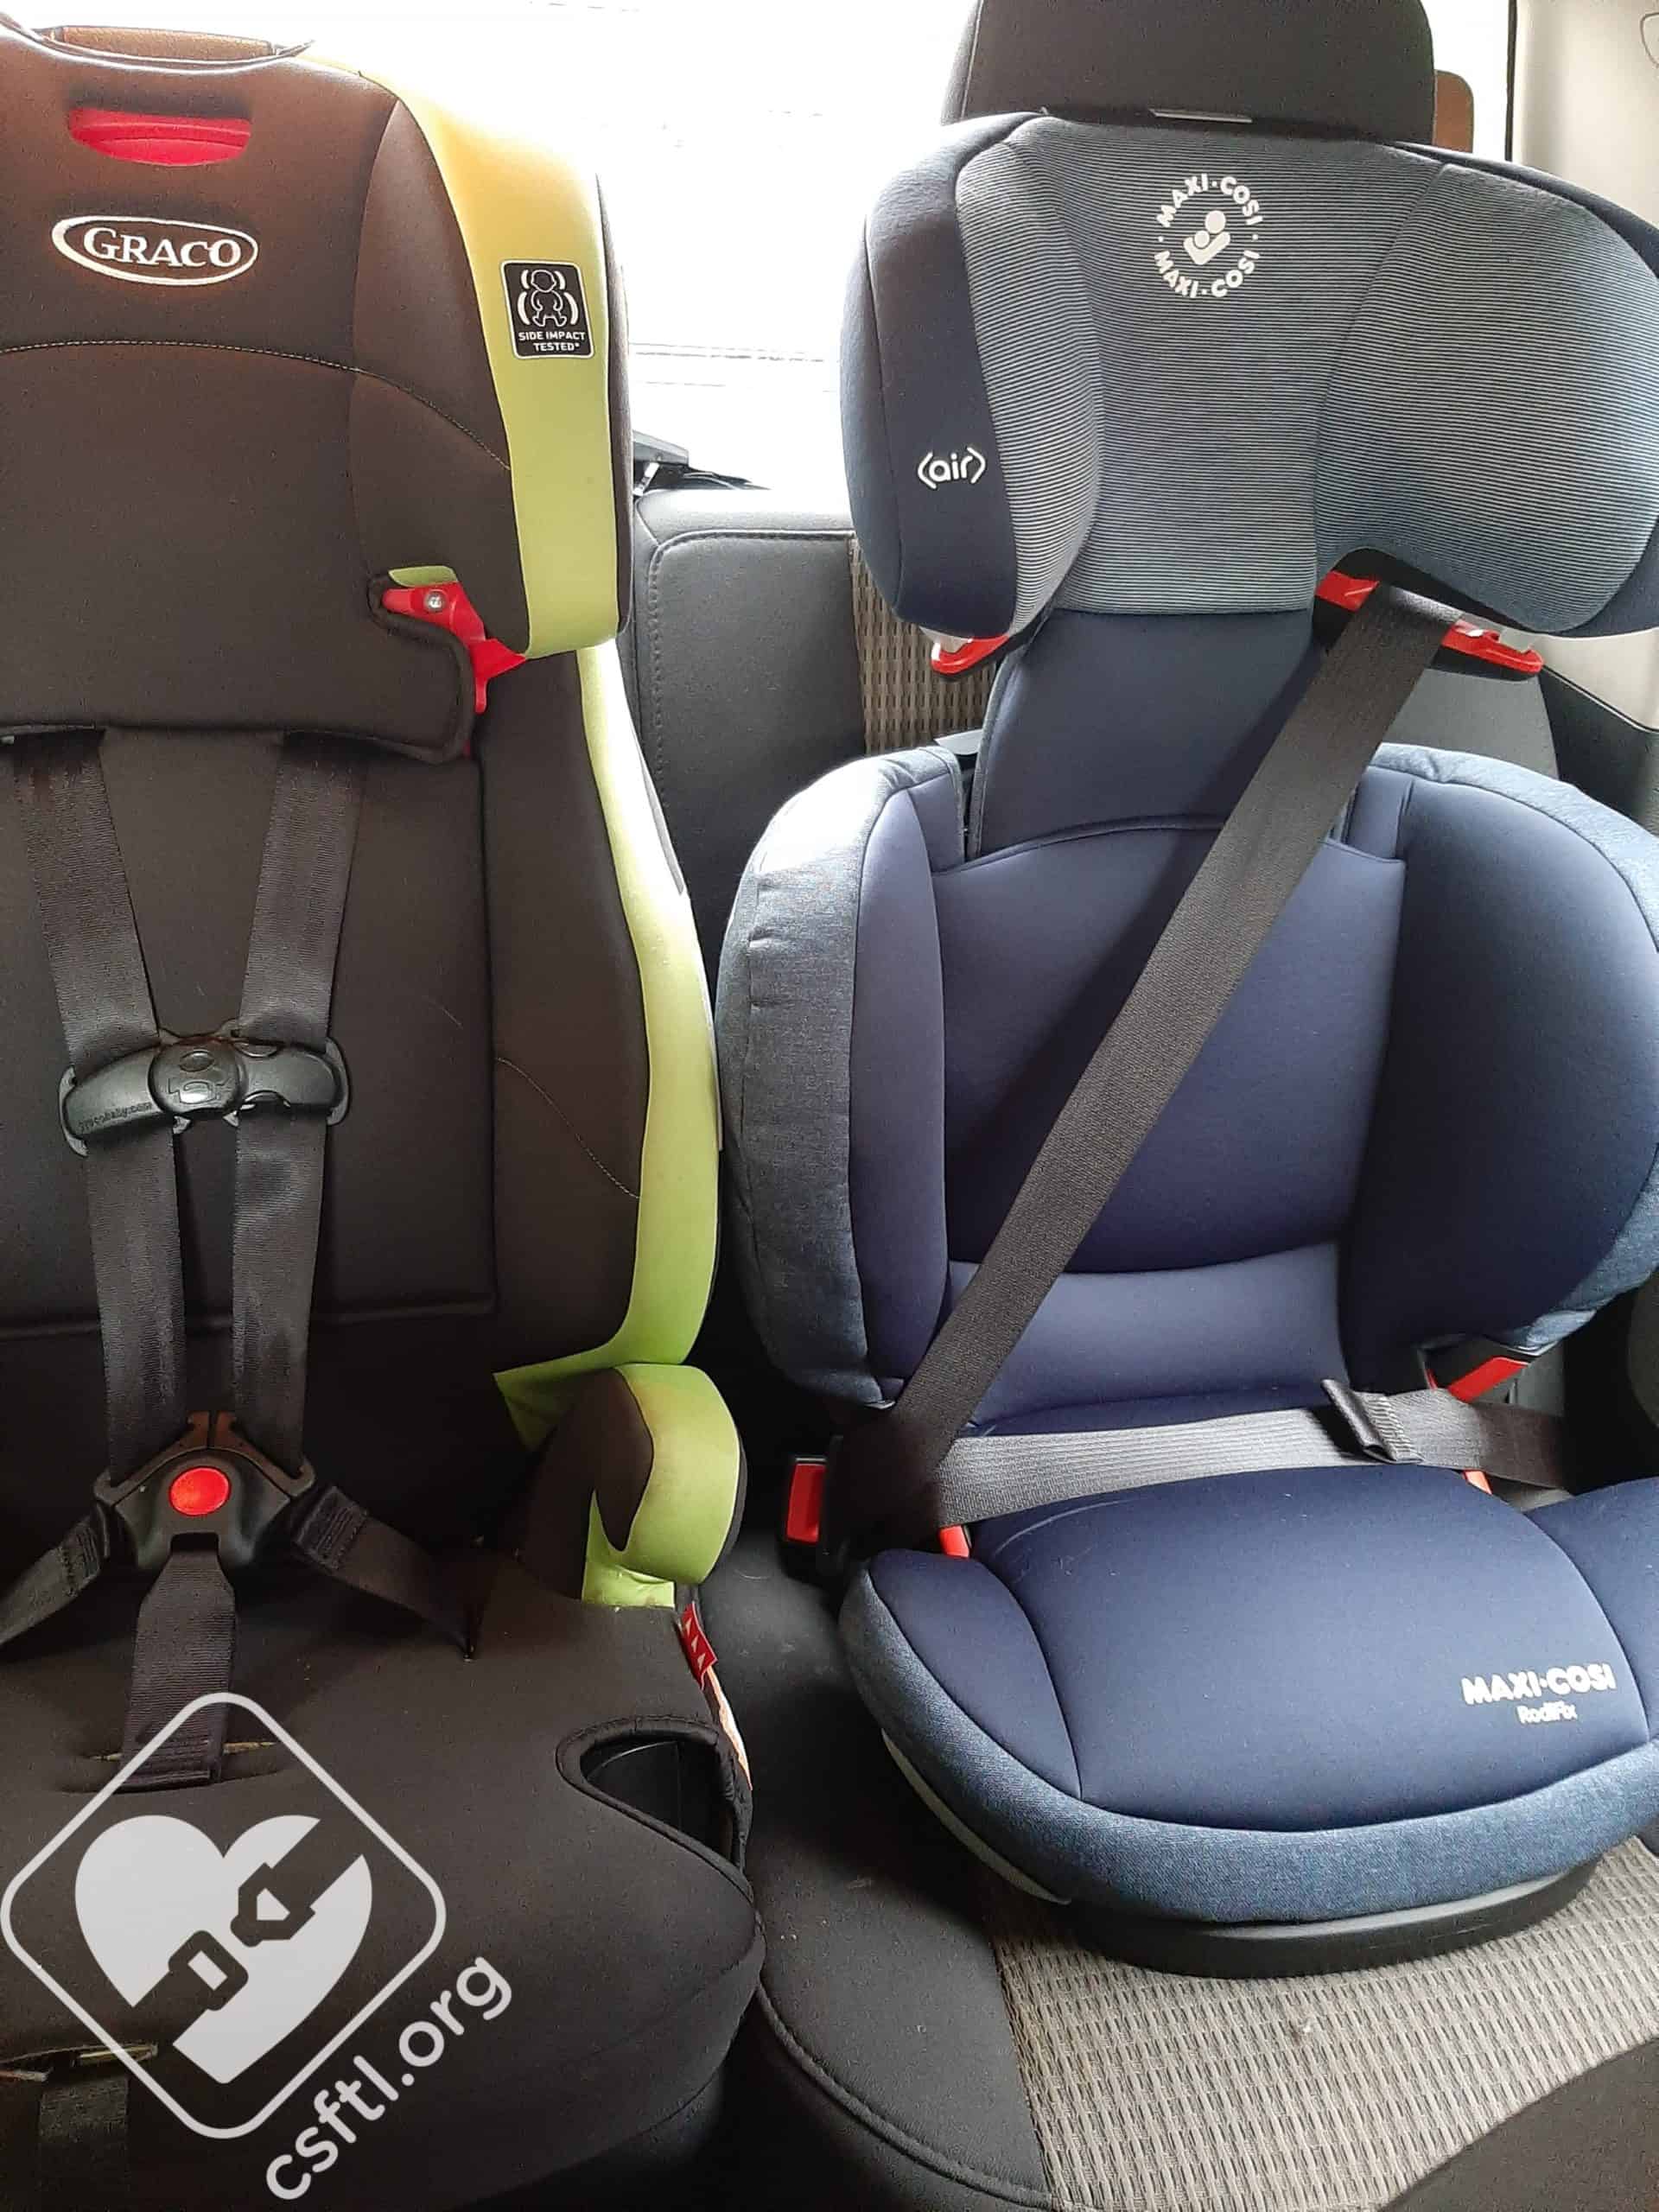 Maxi-Cosi - What's the difference between the RodiSport and RodiFix booster  car seats, you ask? RodiSport: • Converts to a backless booster • Includes  a dishwasher-safe cupholder • Rated for 40-100 lbs.